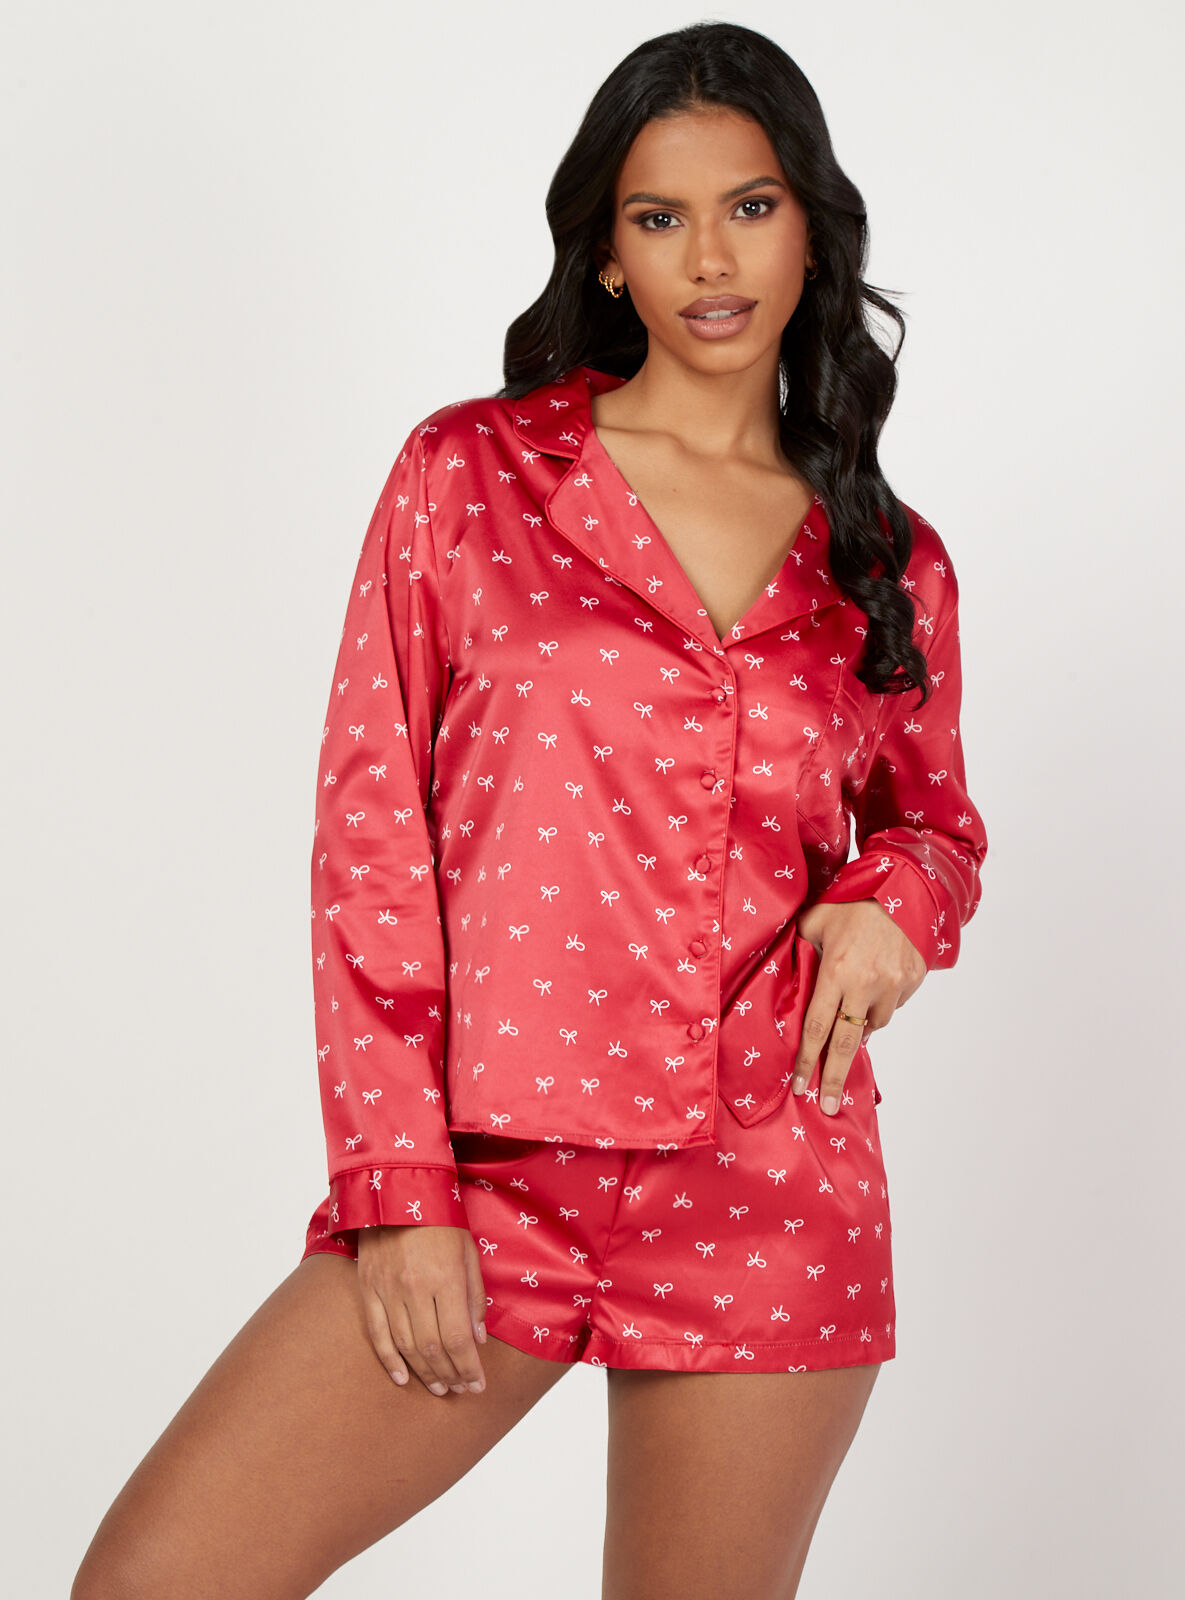 Boux Avenue Bow print satin revere and shorts set - Red Mix - 18